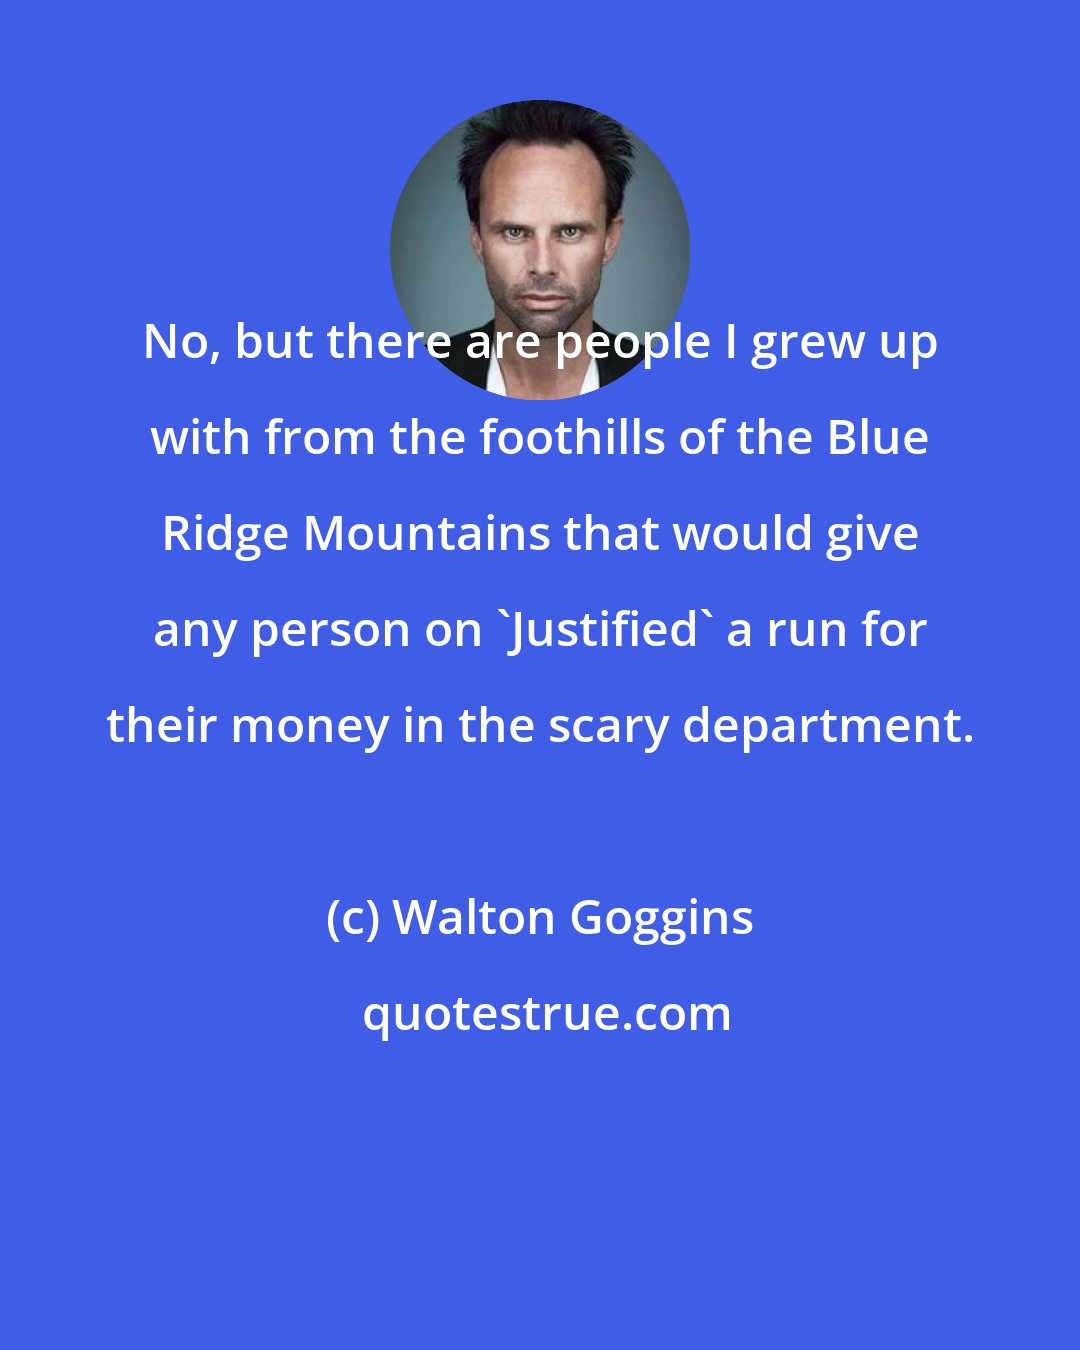 Walton Goggins: No, but there are people I grew up with from the foothills of the Blue Ridge Mountains that would give any person on 'Justified' a run for their money in the scary department.